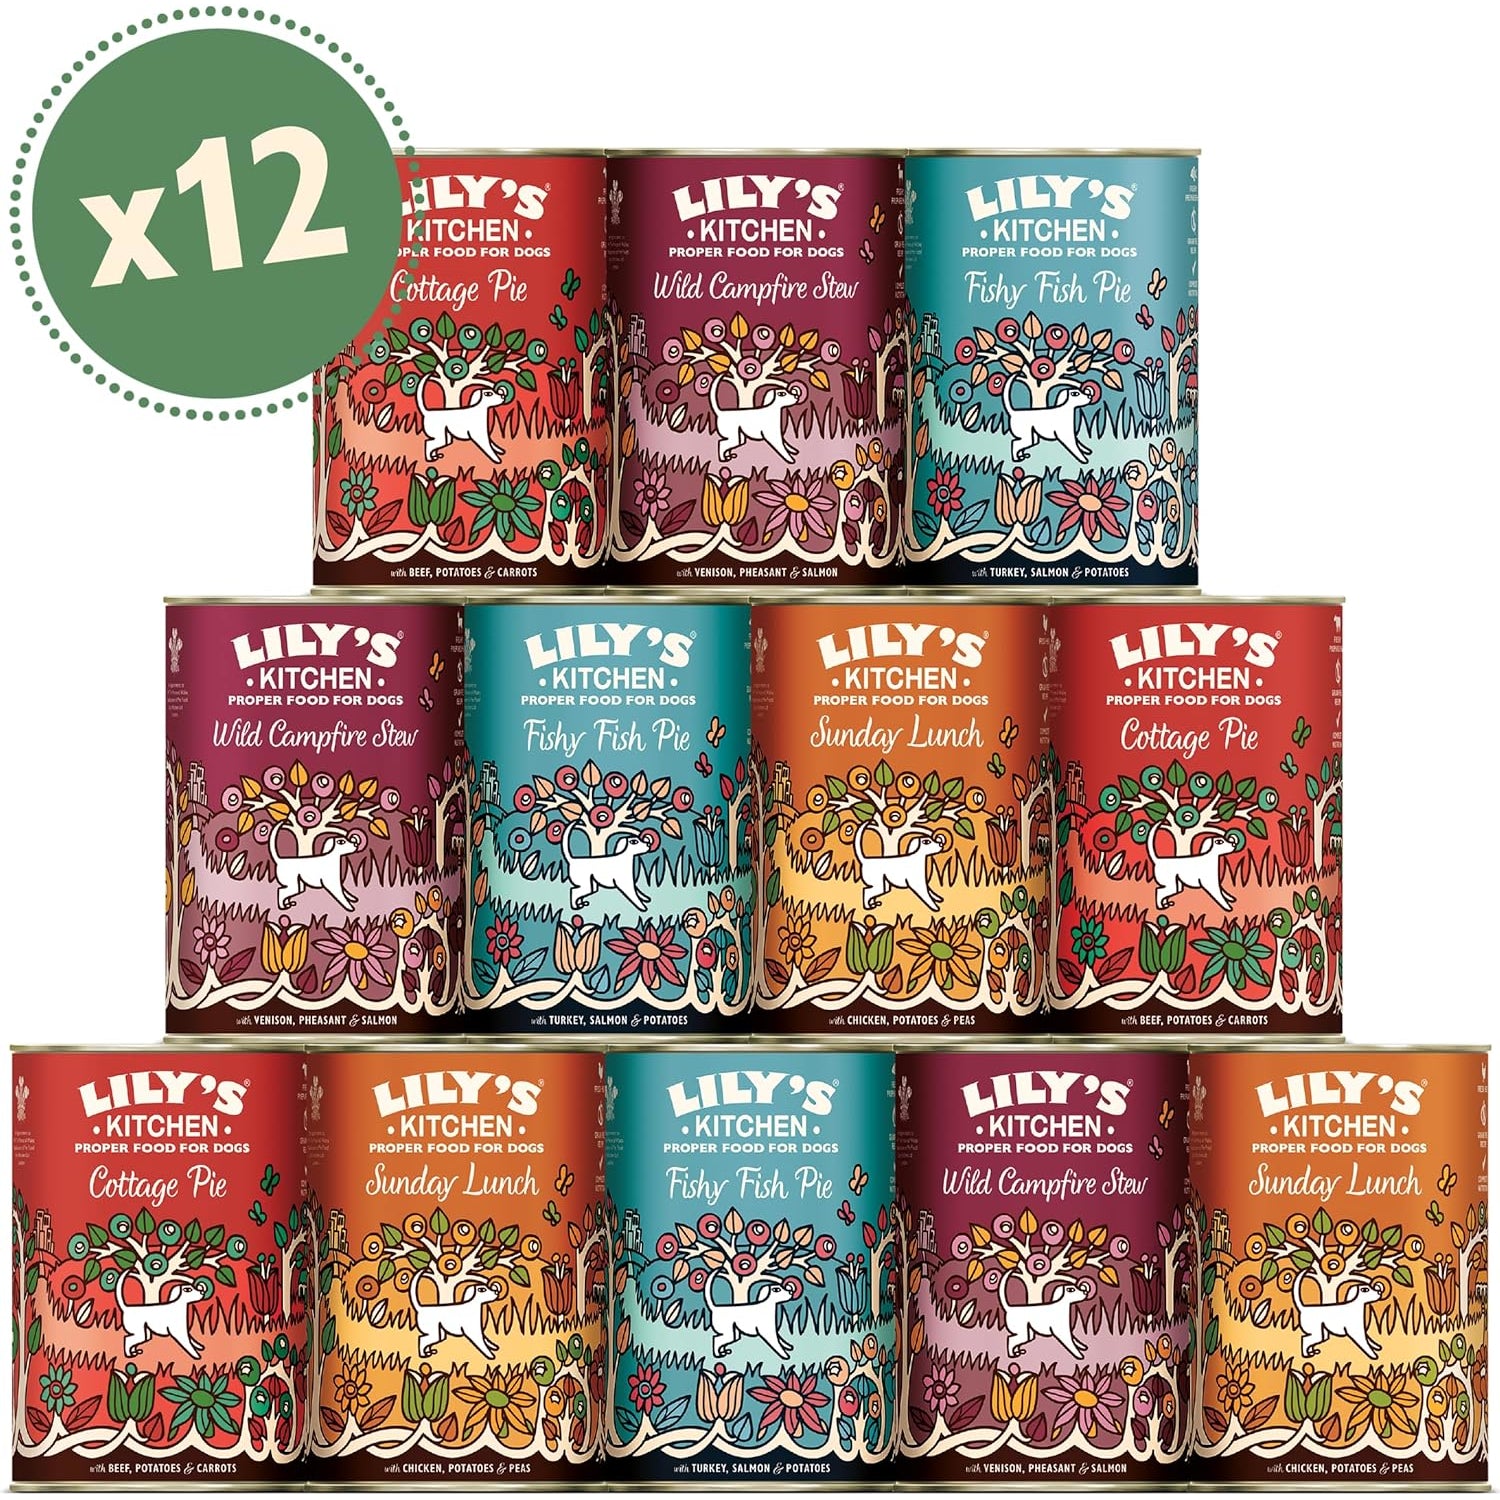 Lilys Kitchen Grain Free Recipes 12 x 400g Cans Multipack